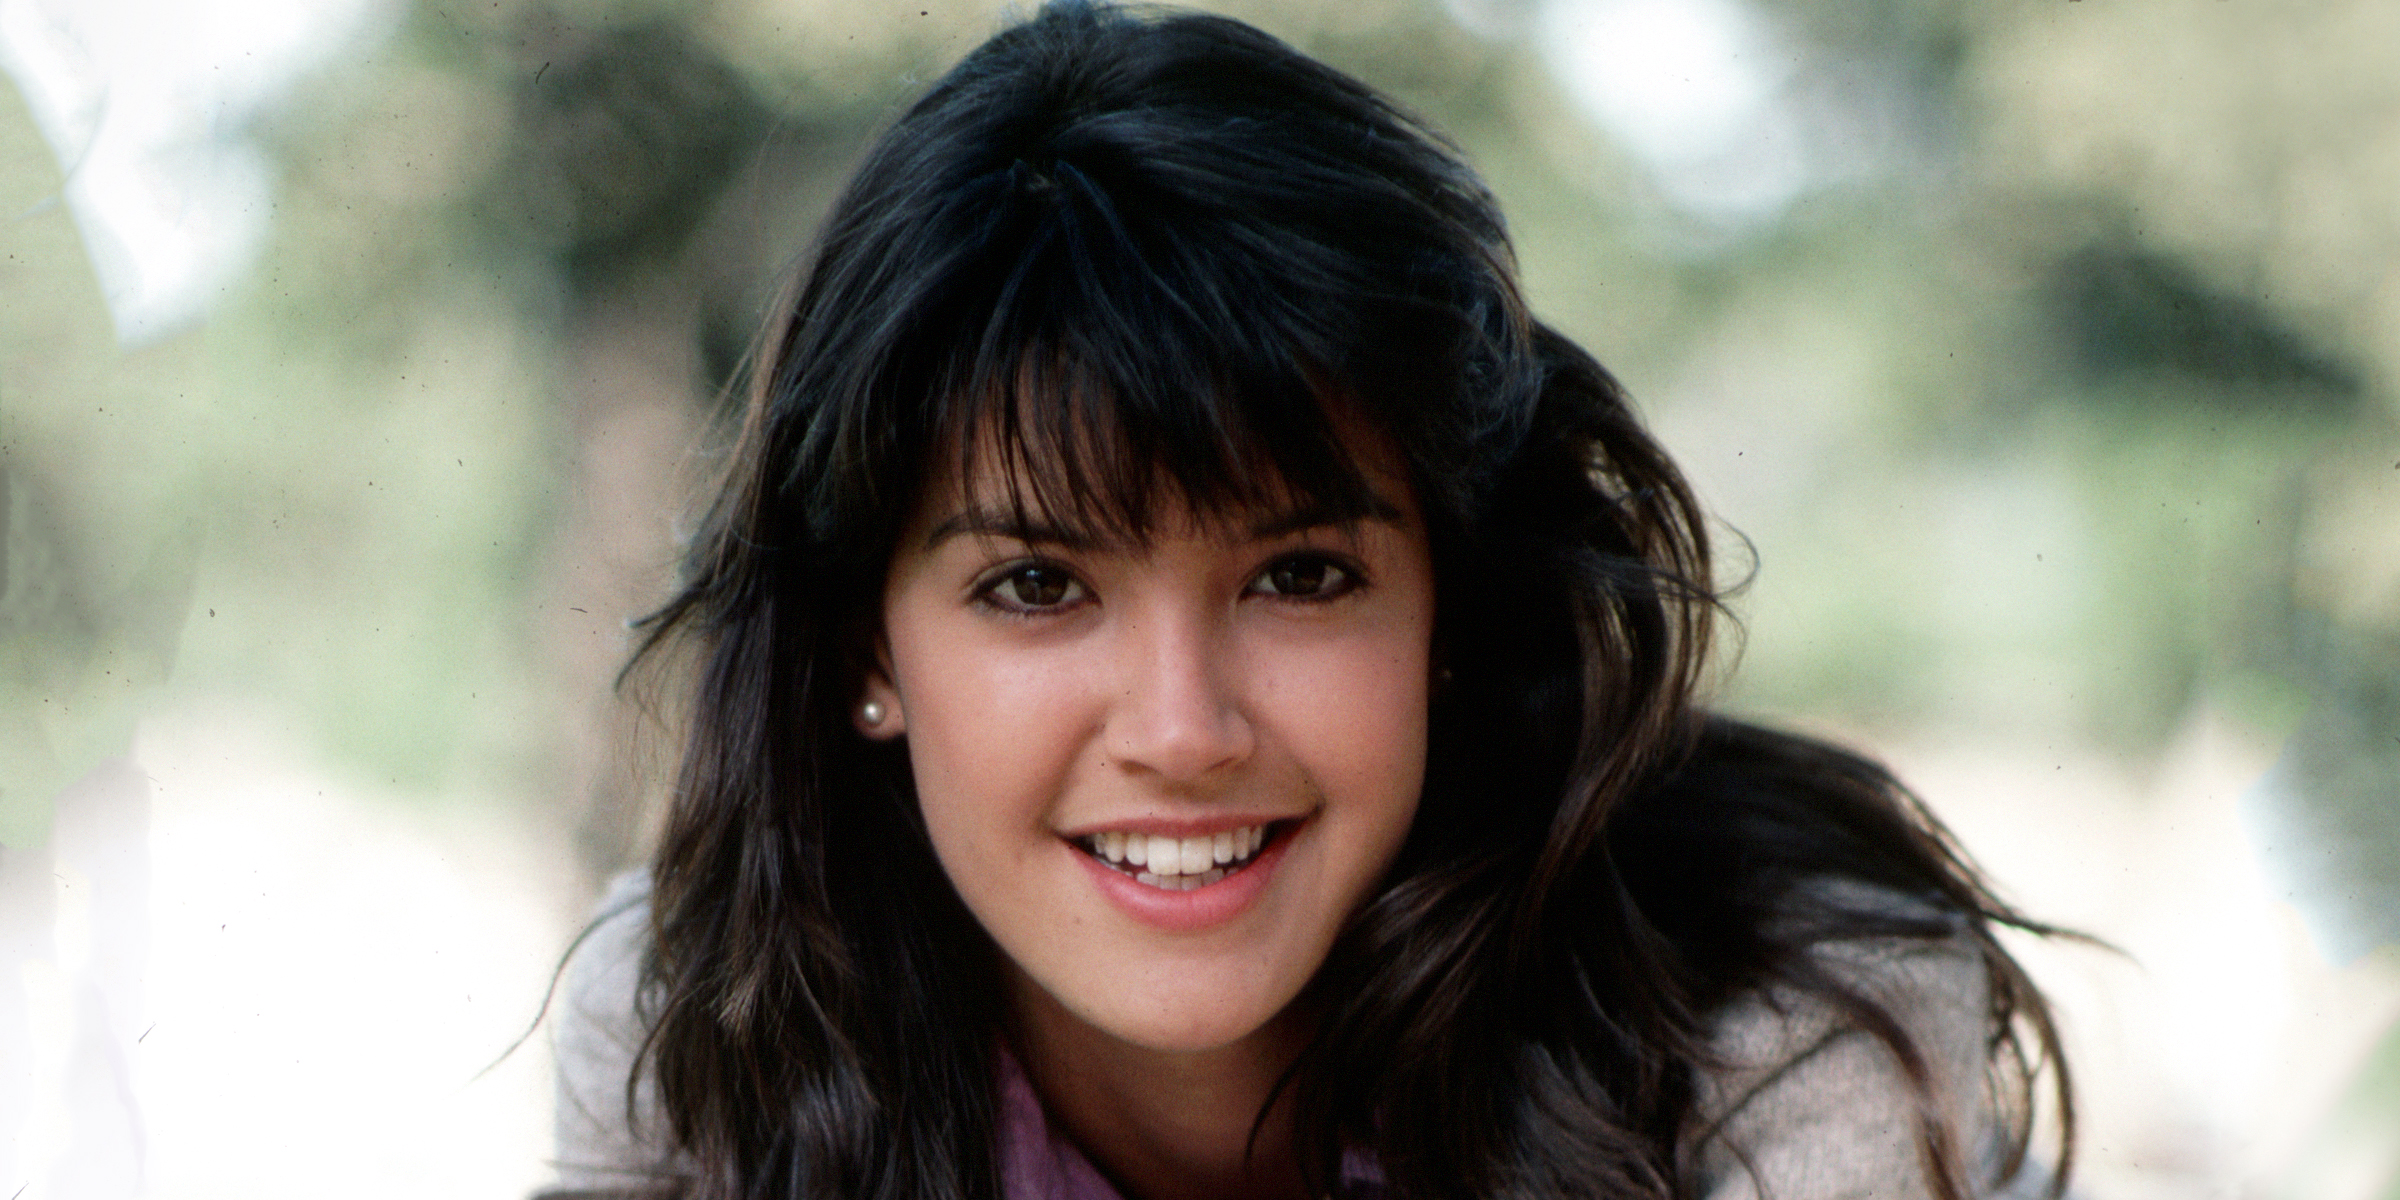 Phoebe Cates | Source: Getty Images